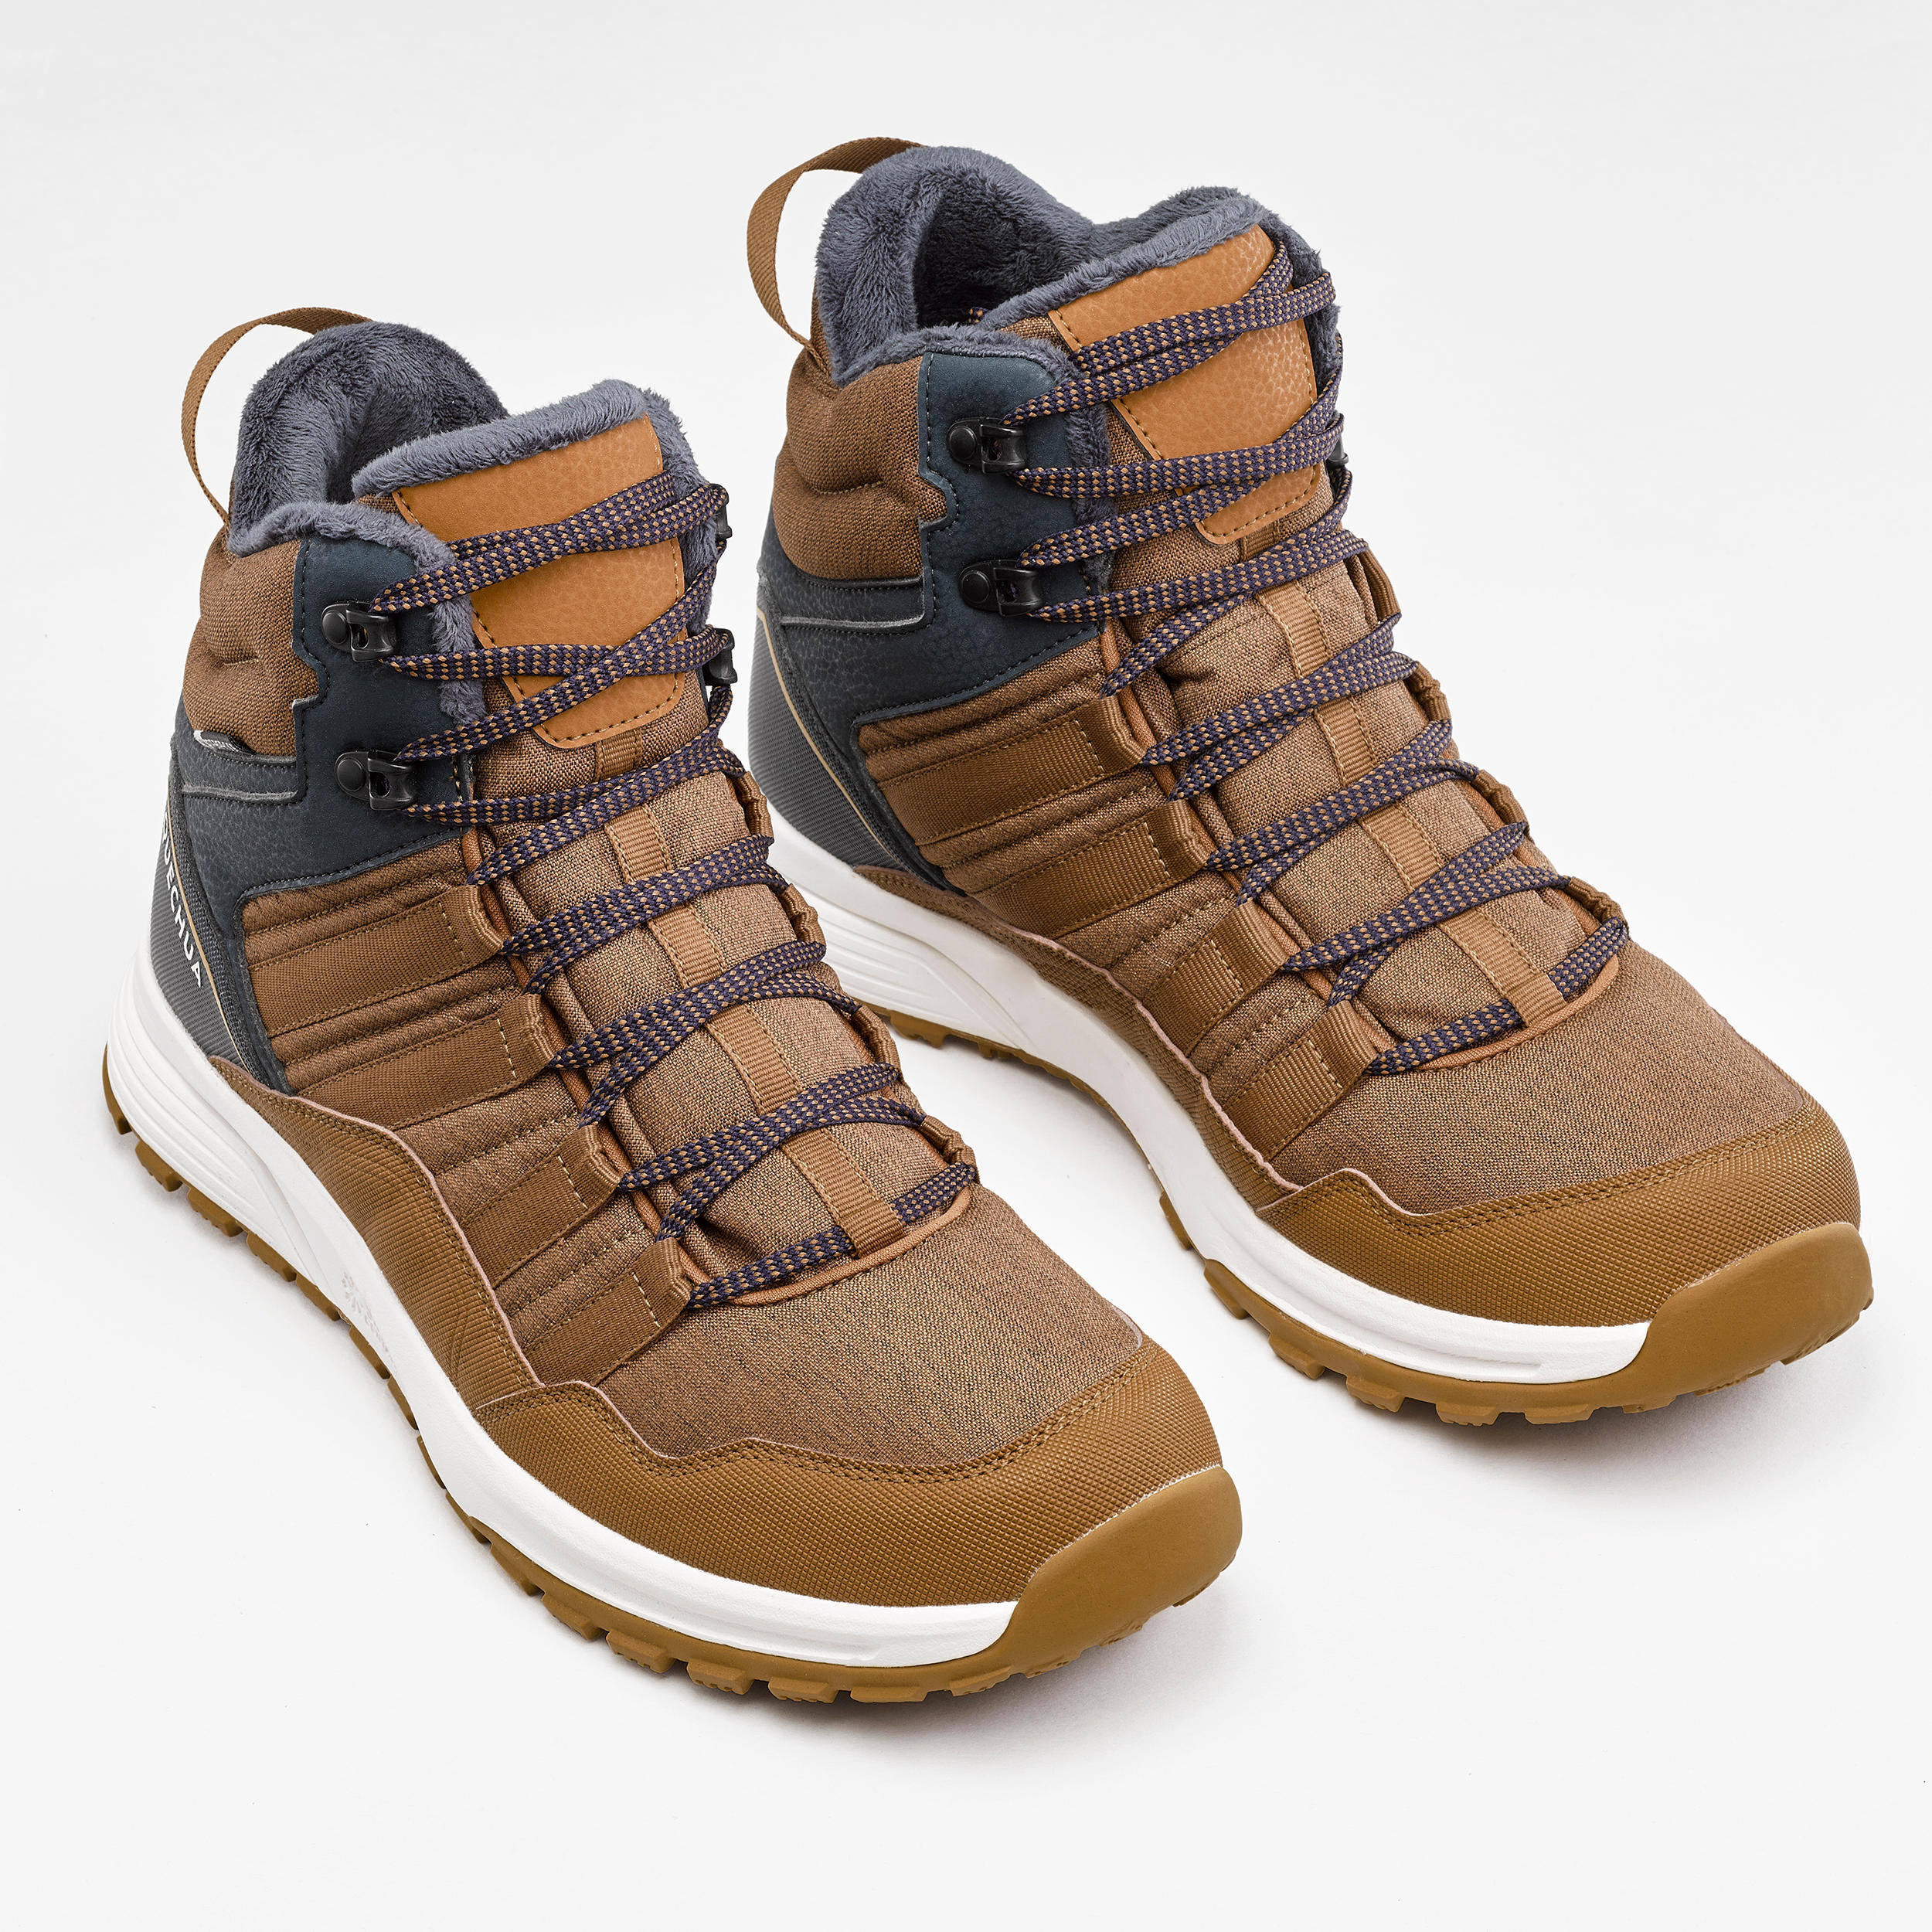 Men’s warm and waterproof hiking boots - SH500 MID 2/7